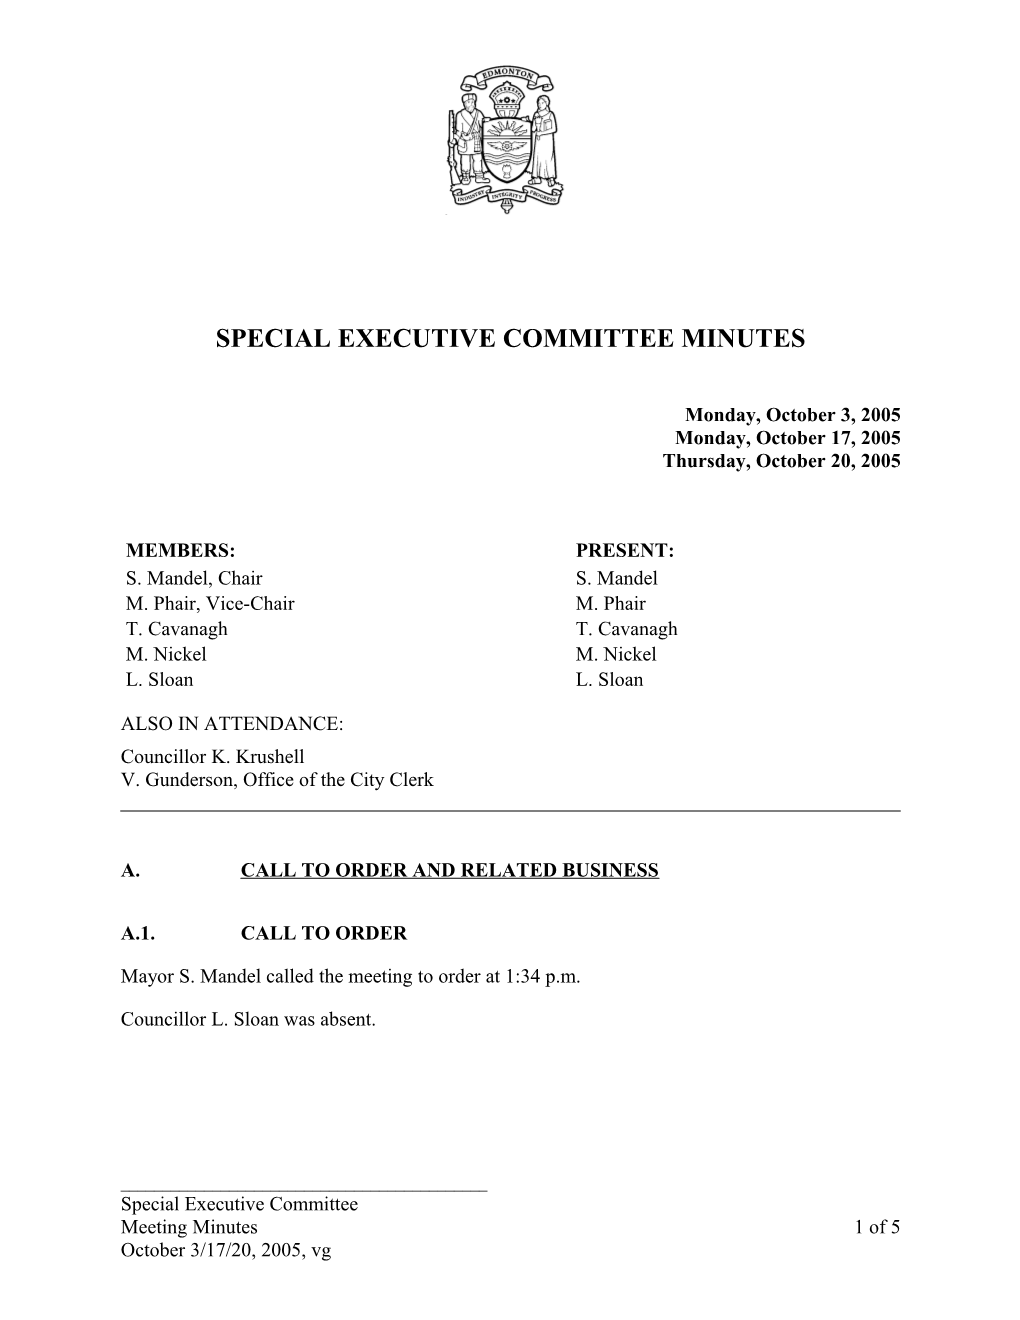 Minutes for Executive Committee October 3, 2005 Meeting